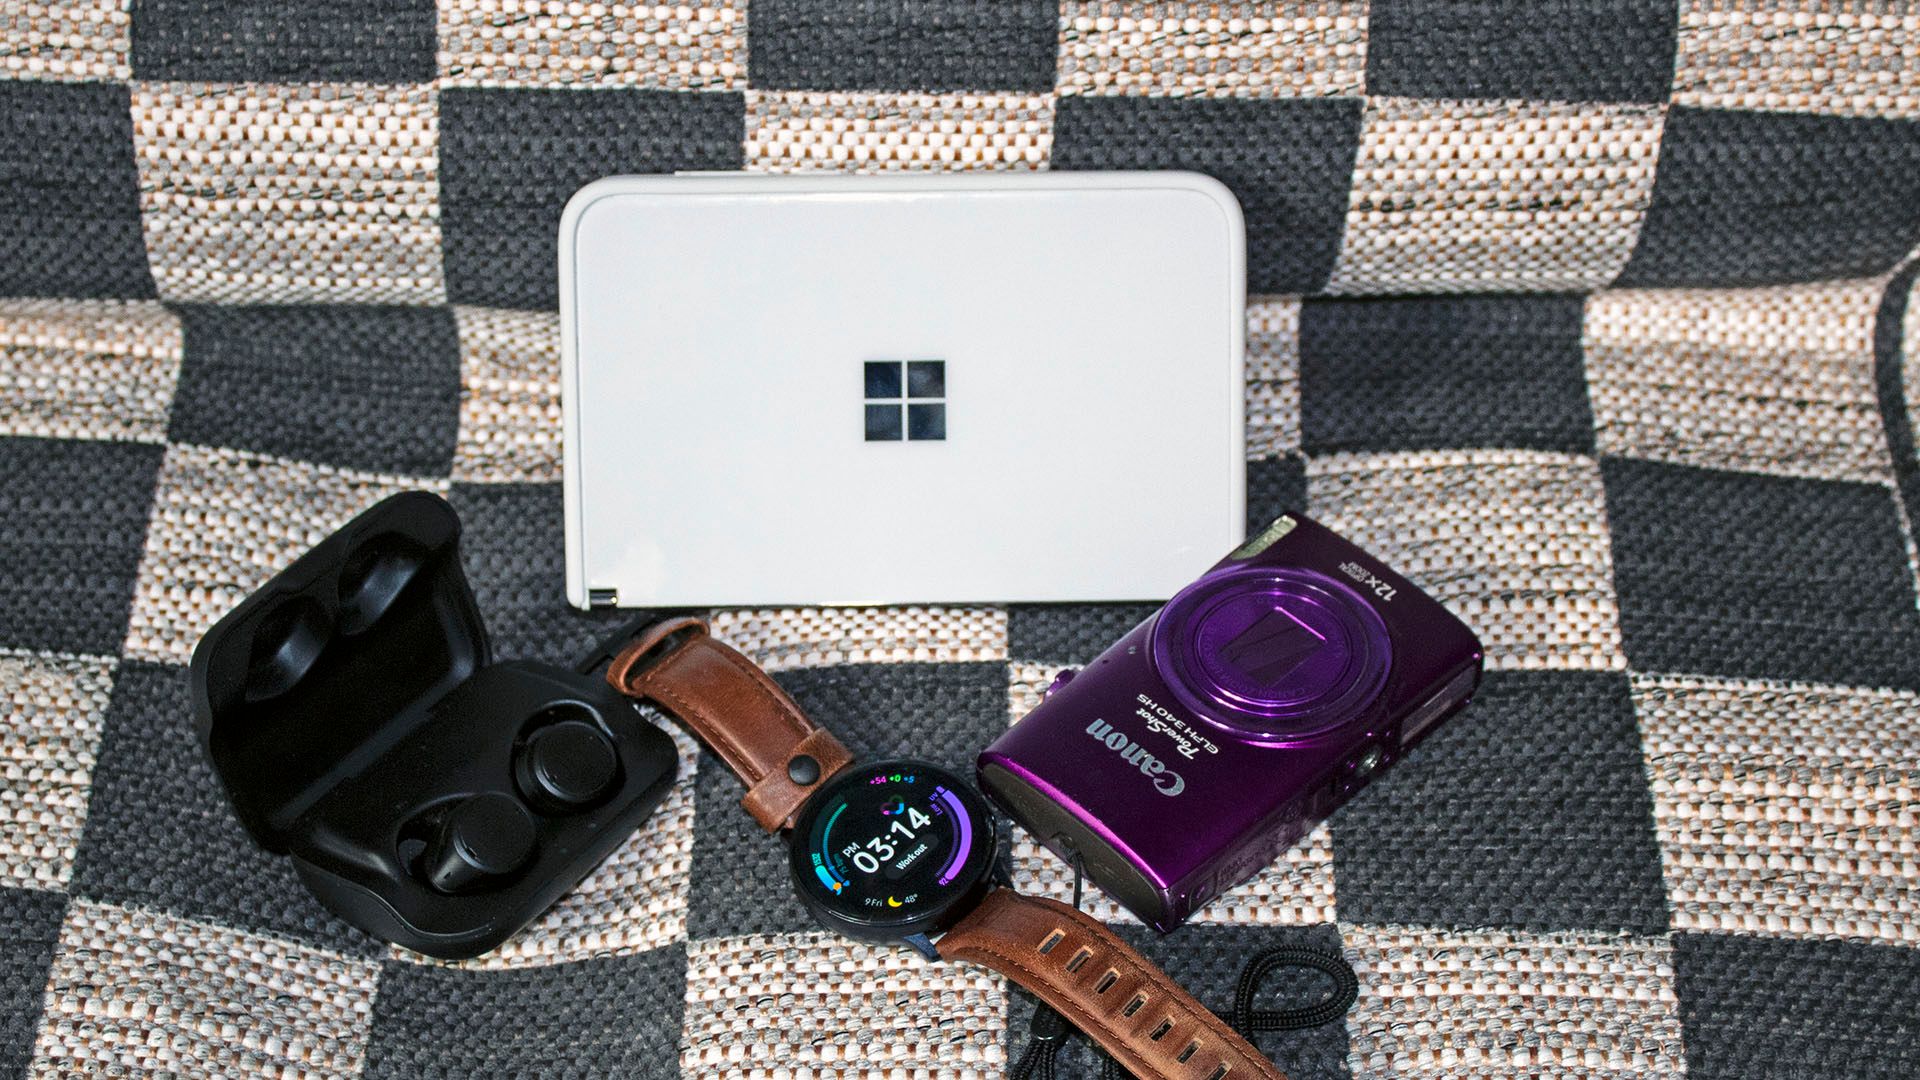 A Surface Duo, smartwatch, handheld camera, and true wireless earbuds on a checkered blanket.